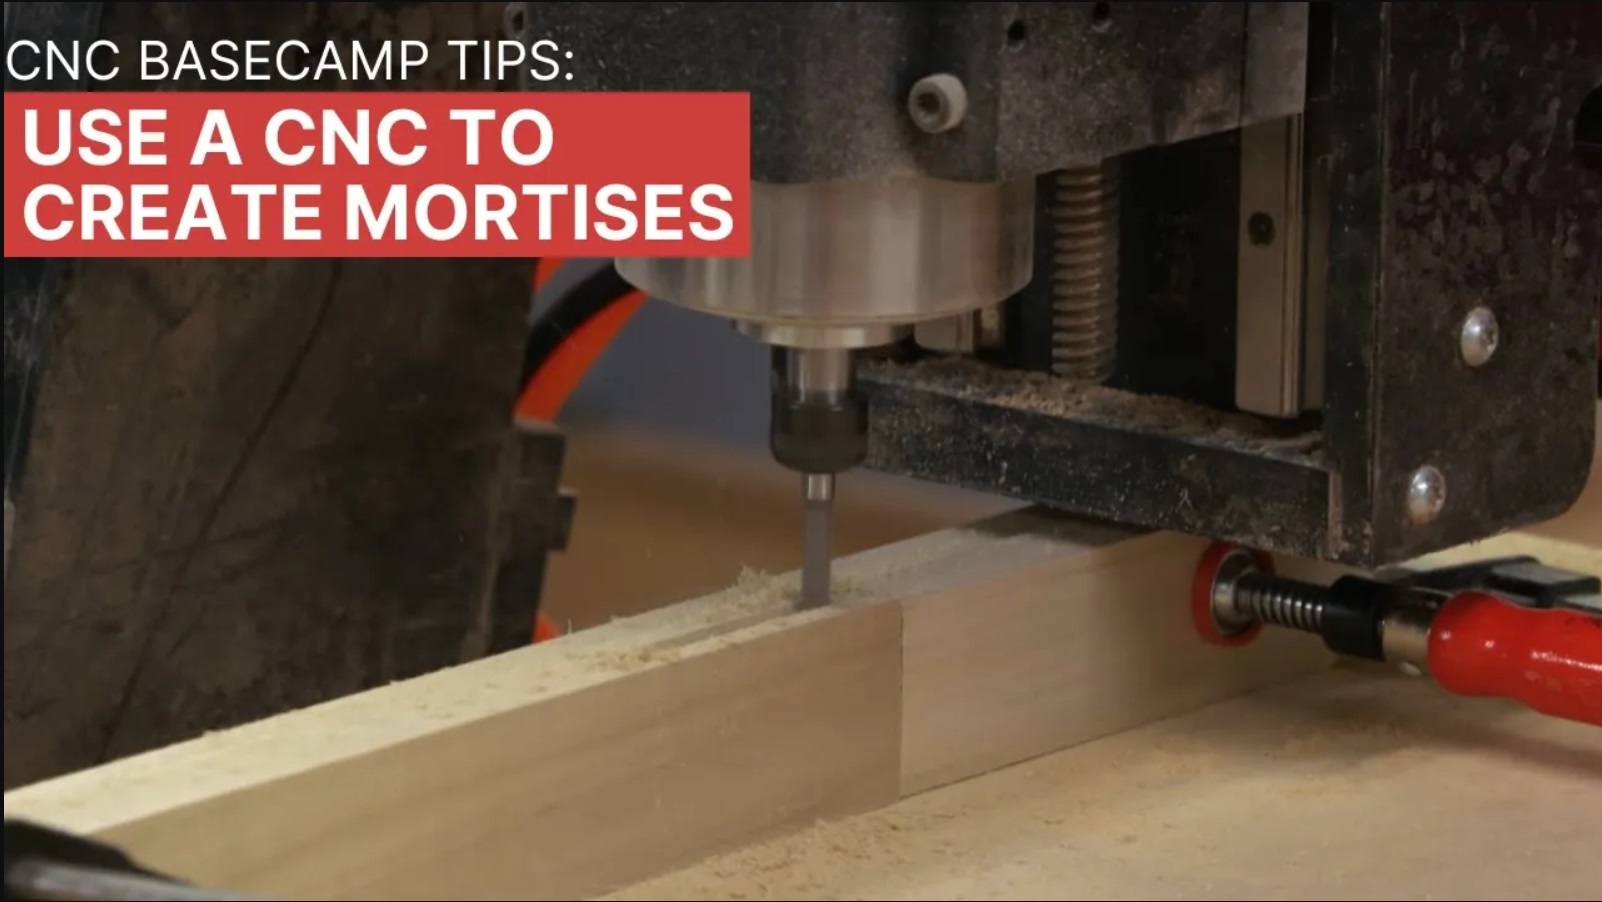 Creating Mortises with a CNC